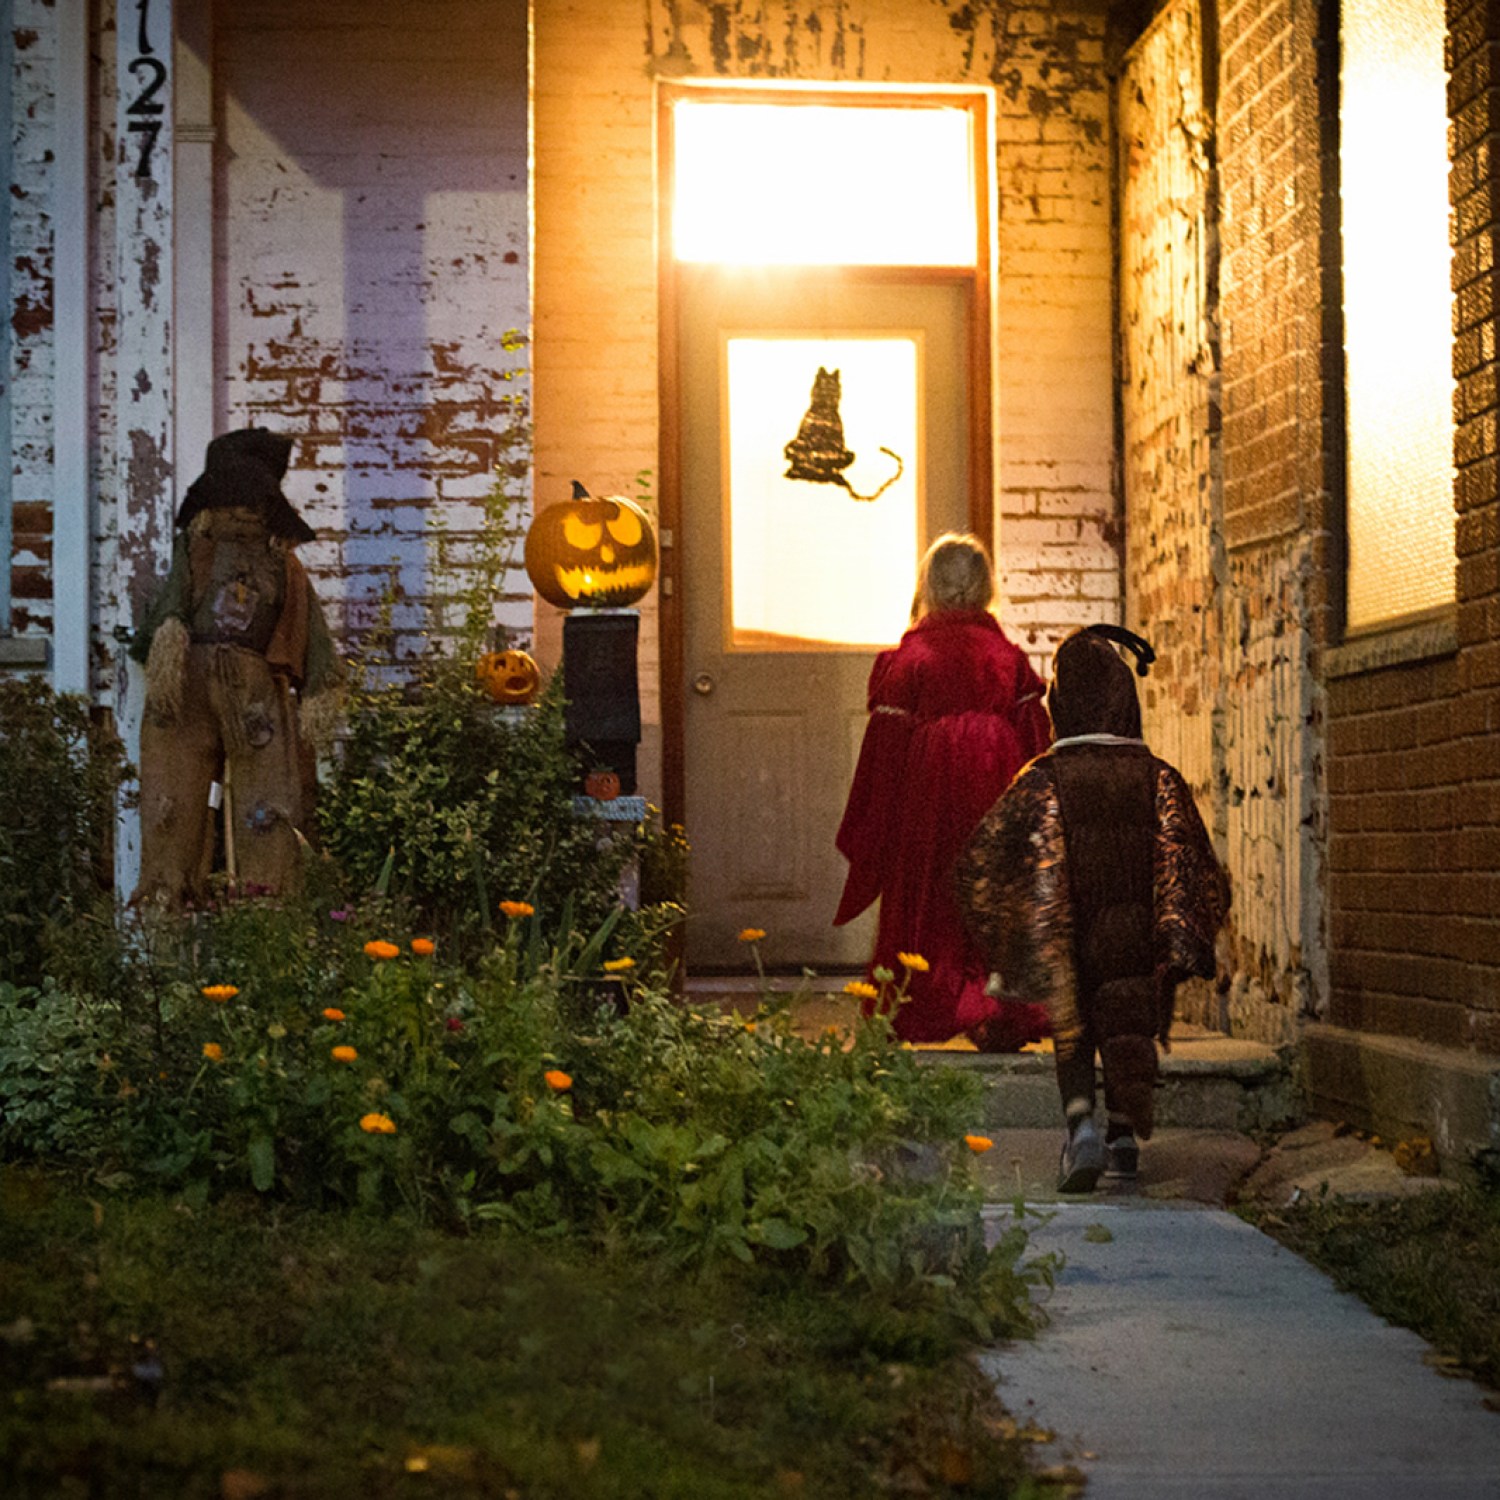 Trick or treat Halloween safety rules in a neighborhood